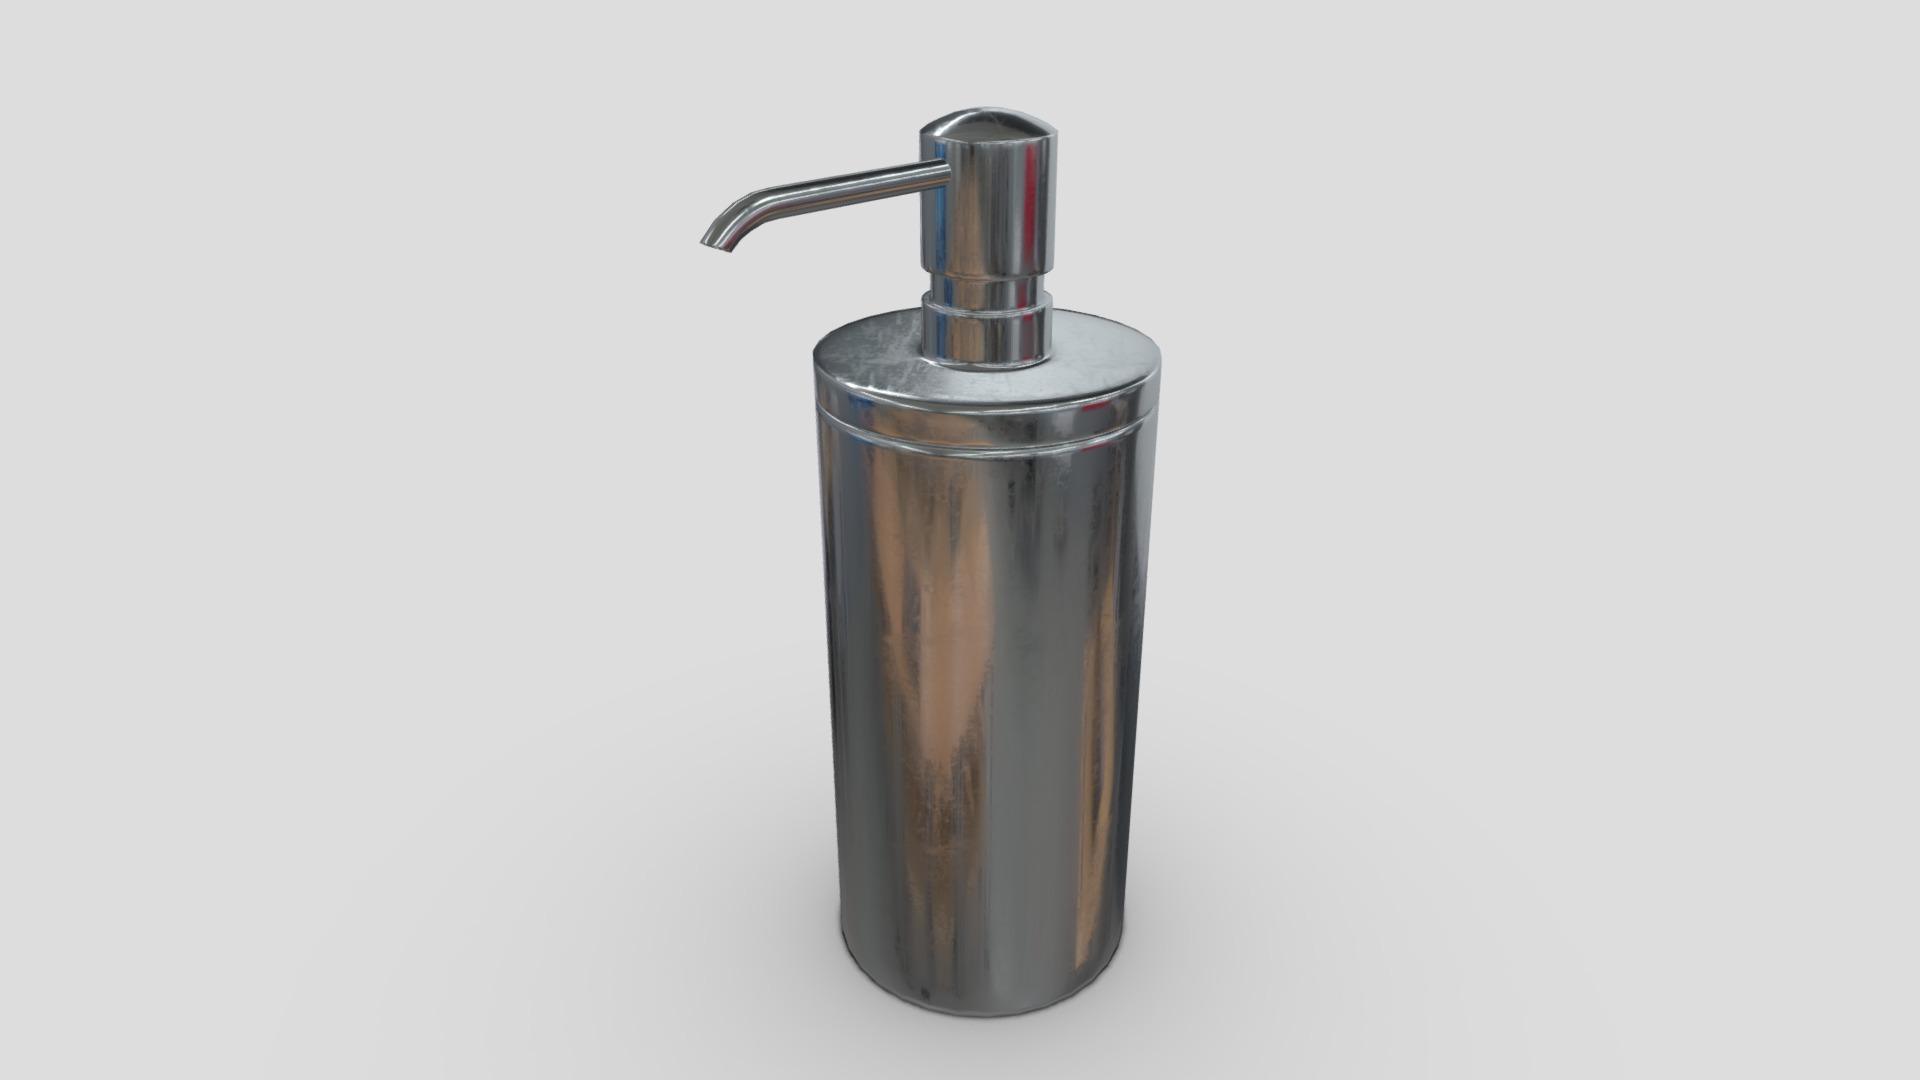 3D model Soap Dispenser 2 - This is a 3D model of the Soap Dispenser 2. The 3D model is about a silver and gold metal can.